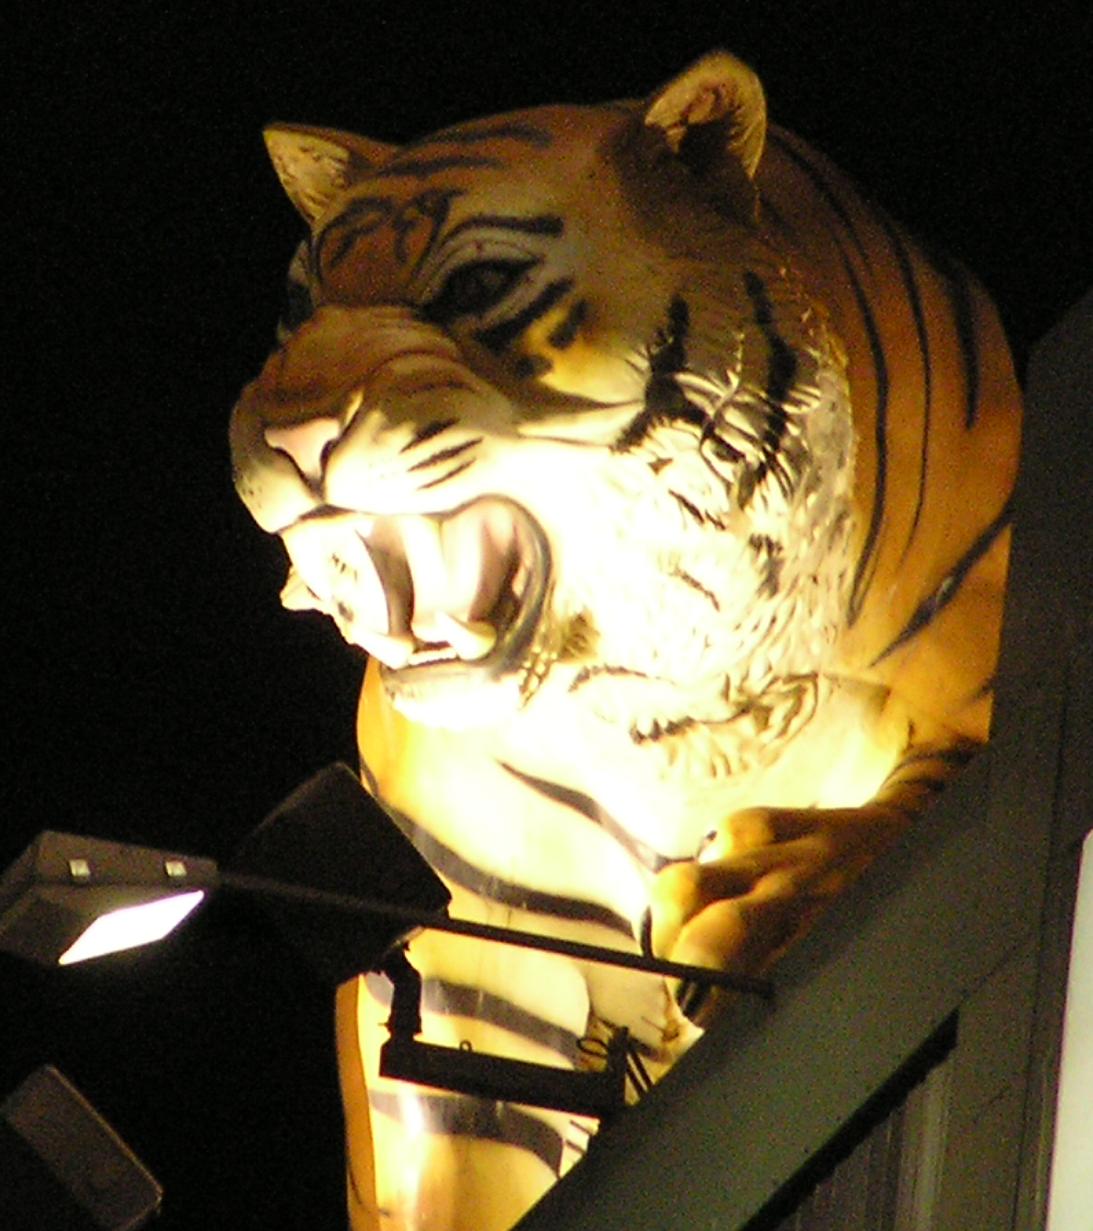 The Tiger on top of the board - Comerica Park